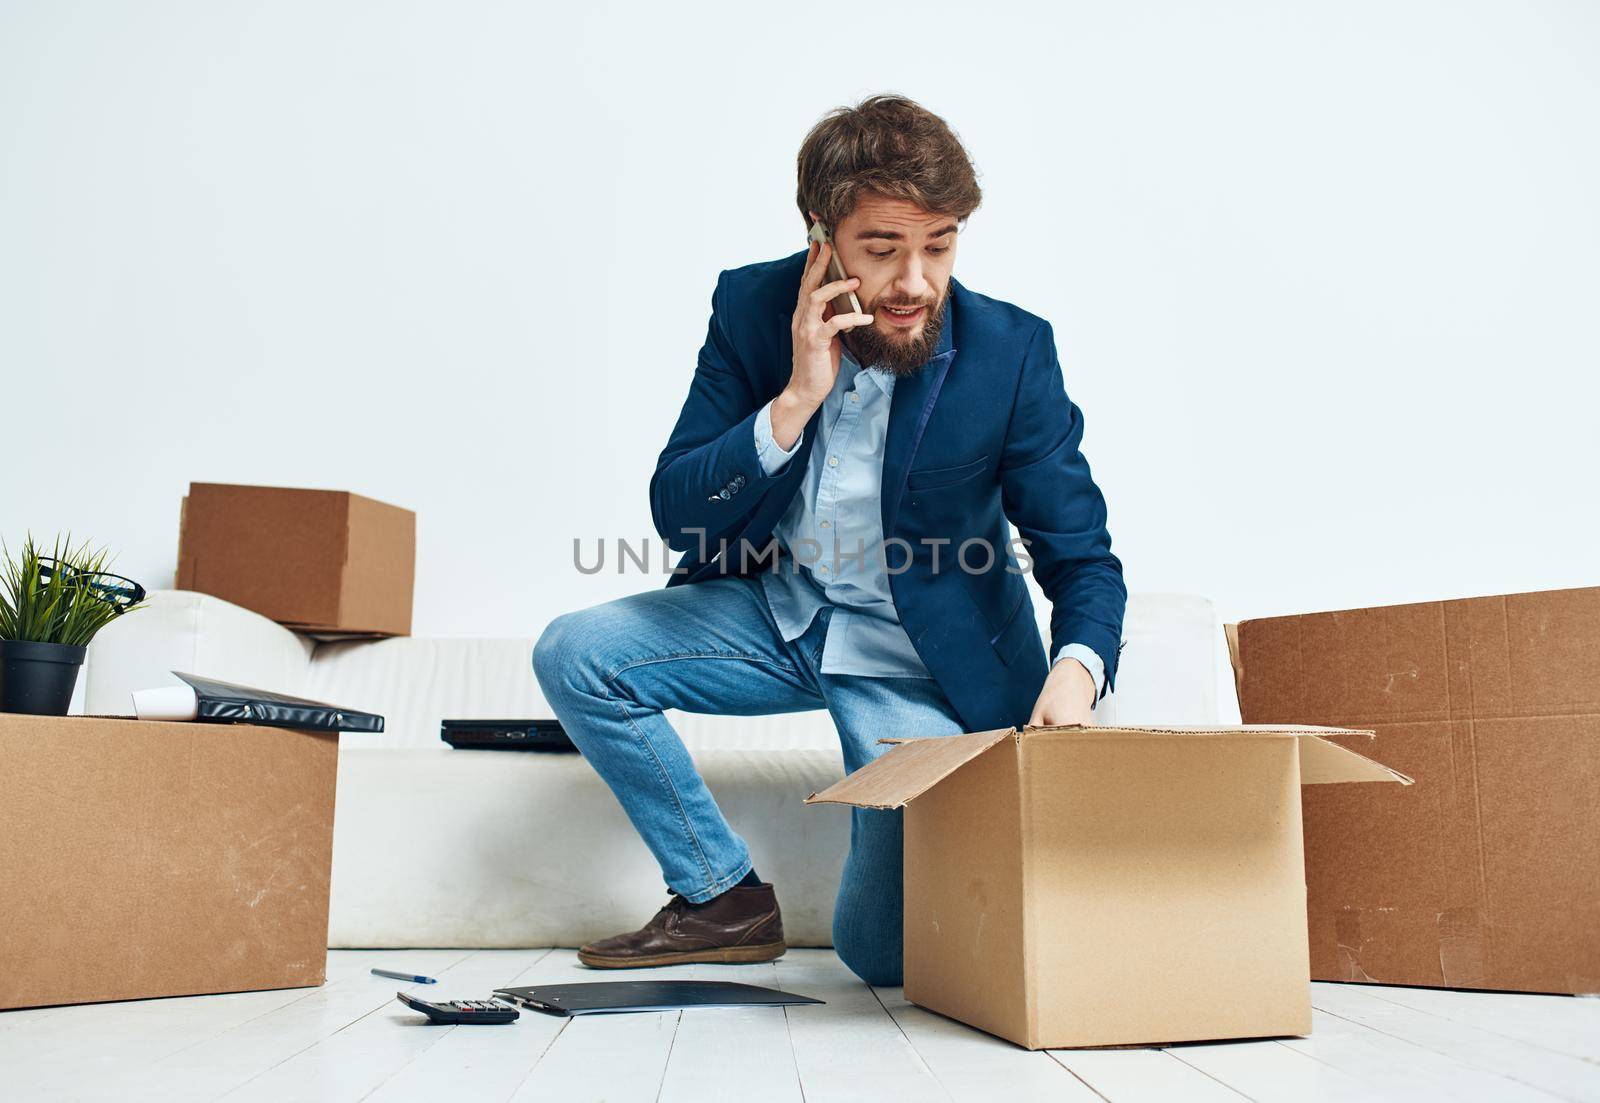 Manager talking on the phone office boxes unpacking emotions of an official by SHOTPRIME